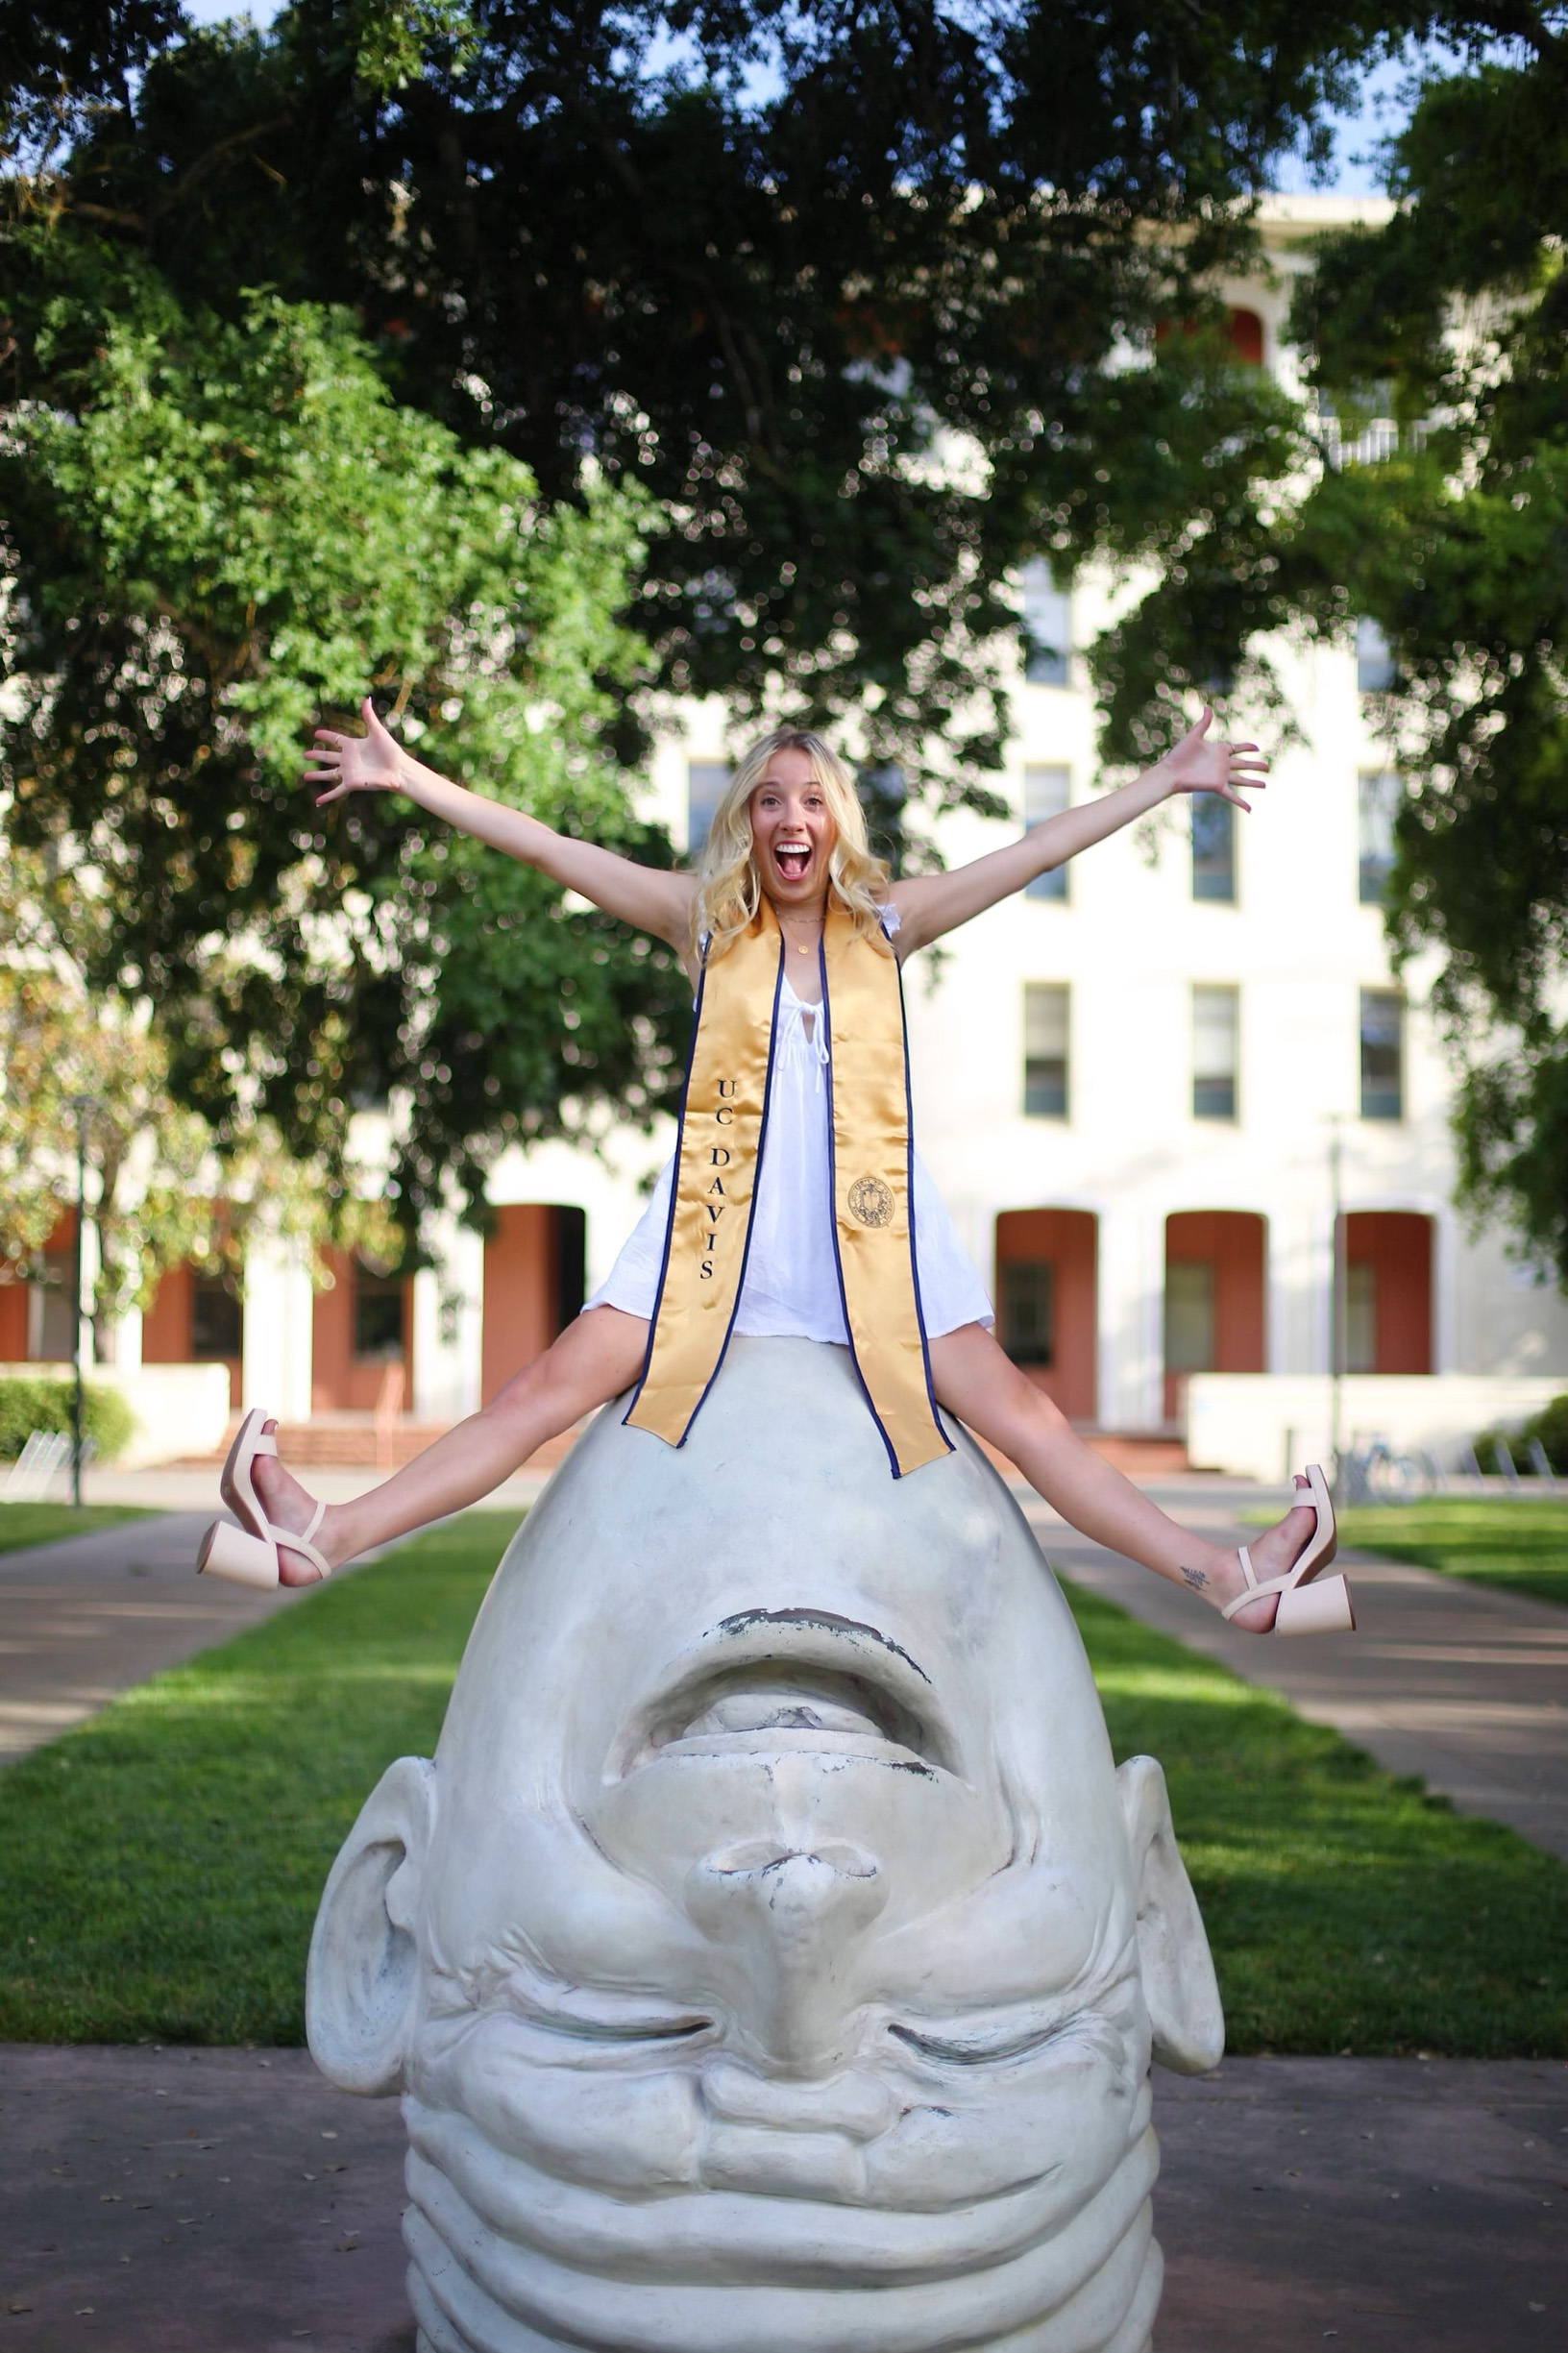 An image of Savannah Torgerson sitting atop one of the UC Davis Eggheads, wearing a white dress and gold and blue UC Davis graduation shawl, with a joyful and excited expression on her face.